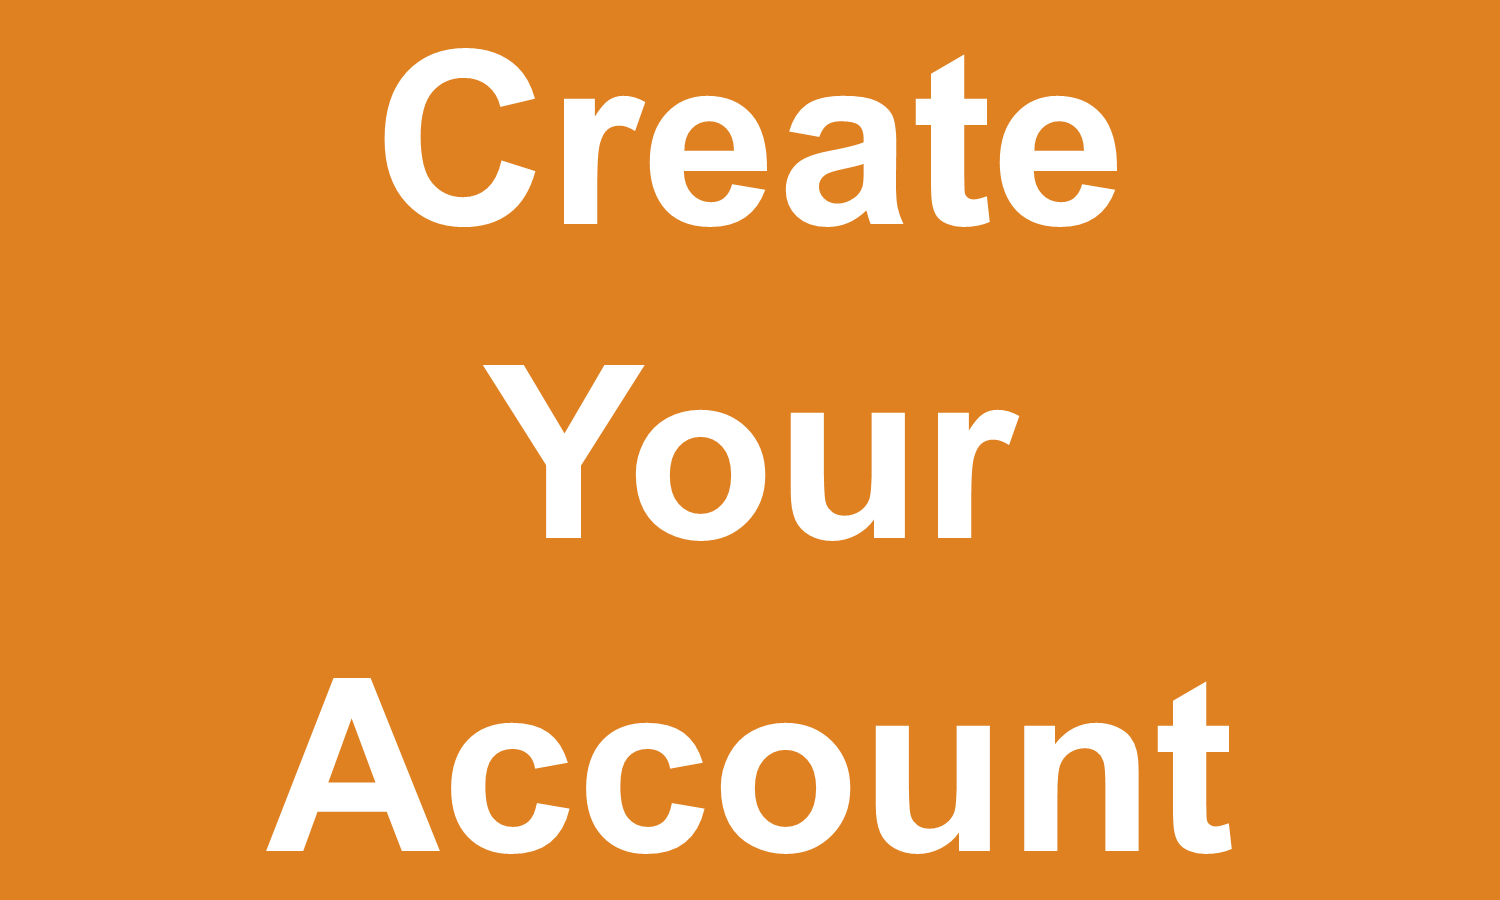 create-account-portal-buttons-2022.png